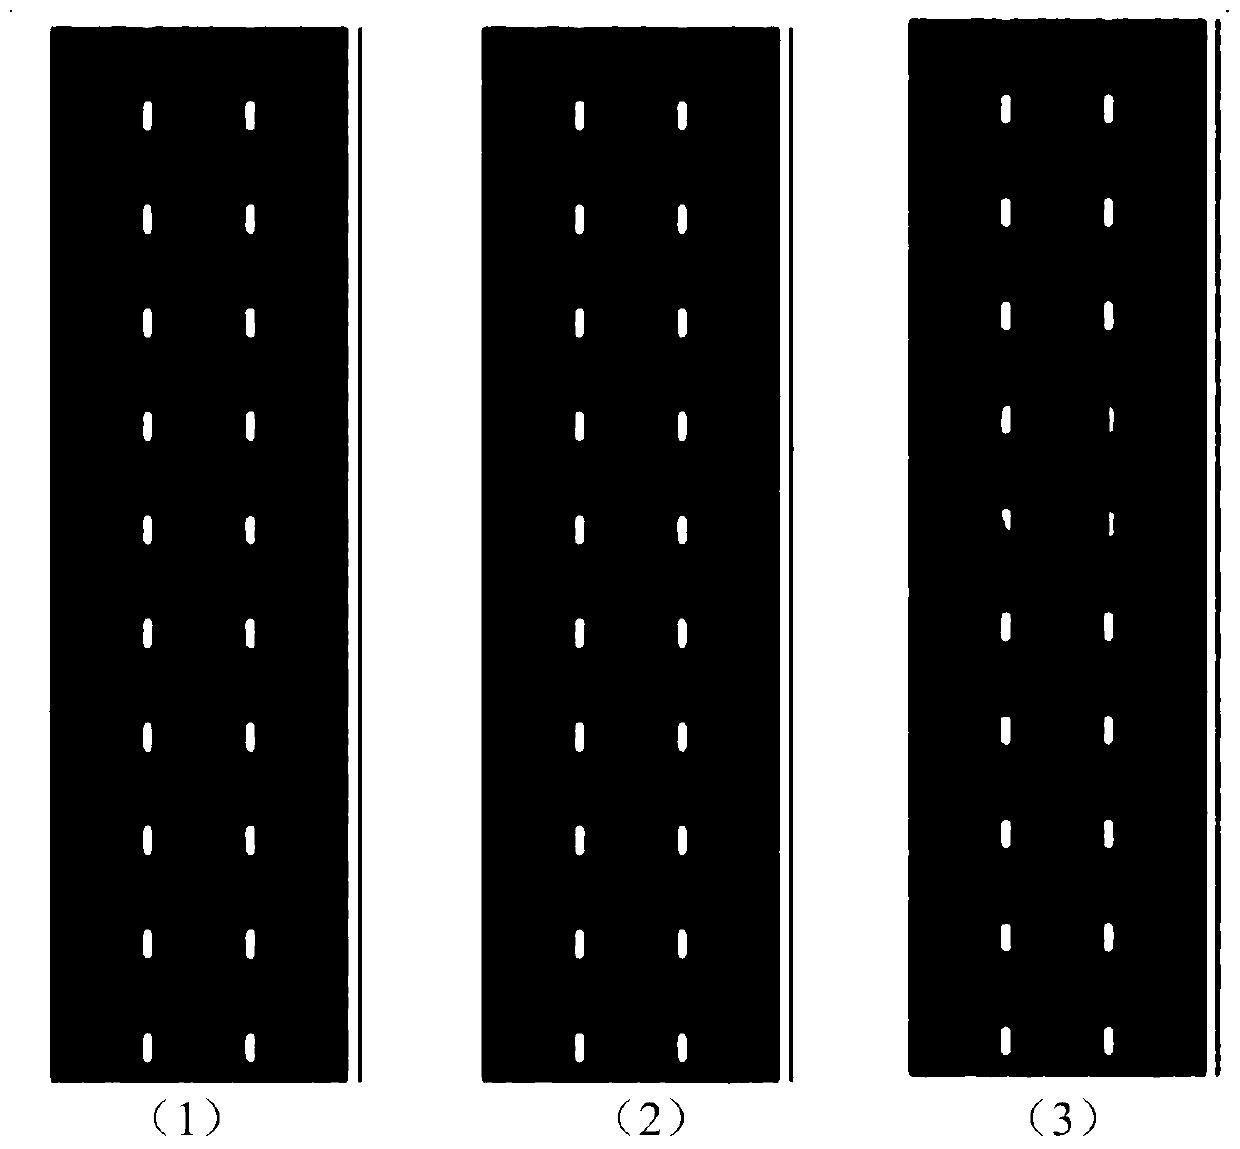 A decision-making method for expressway overtaking behavior applied to autonomous vehicles